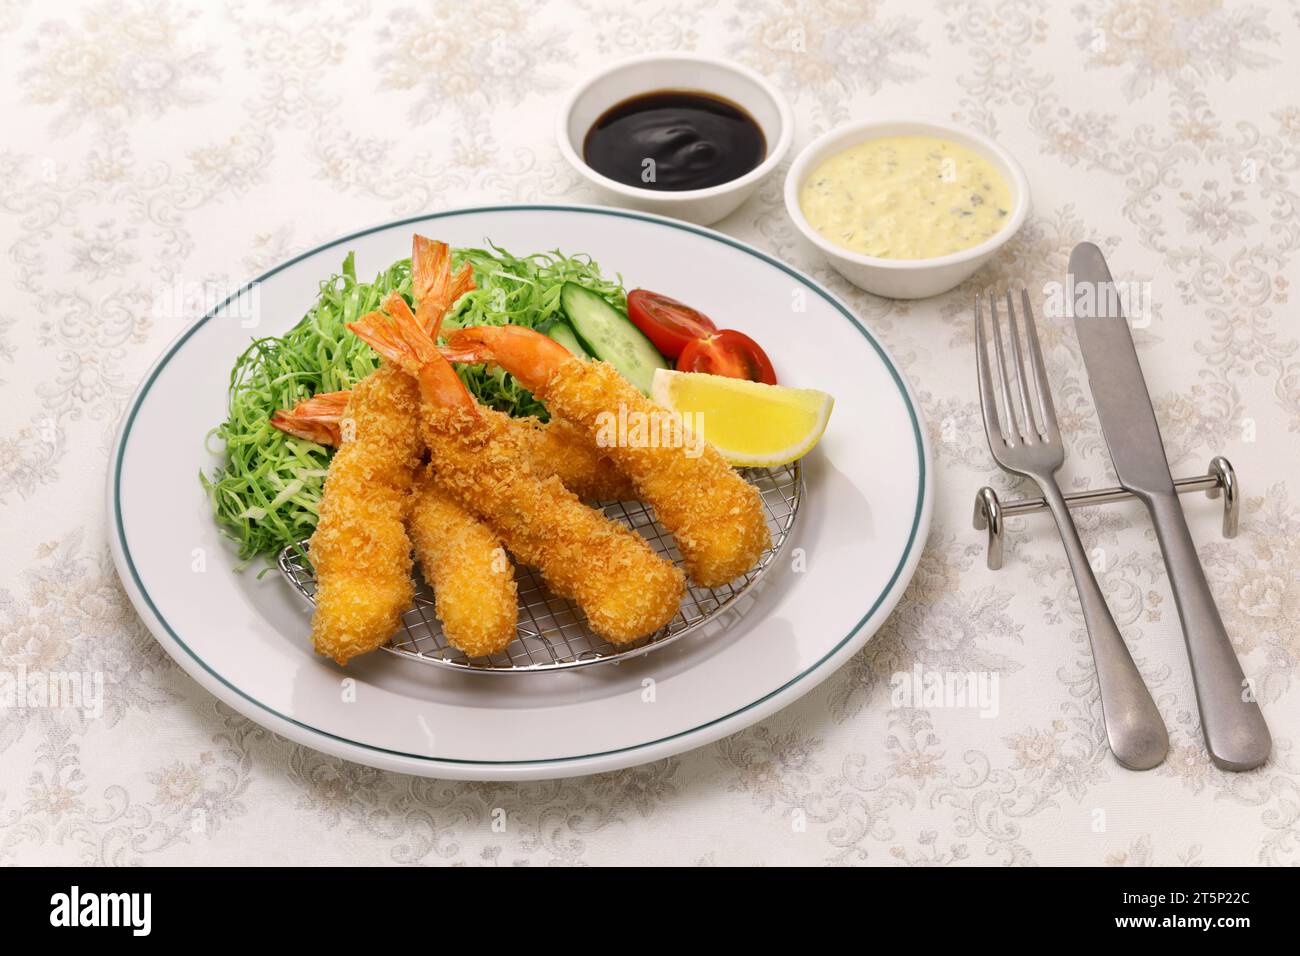 Japanese Ebi Fry is shrimp that has been peeled, coated in flour, dipped in egg batter, then breaded and fried in oil. Stock Photo